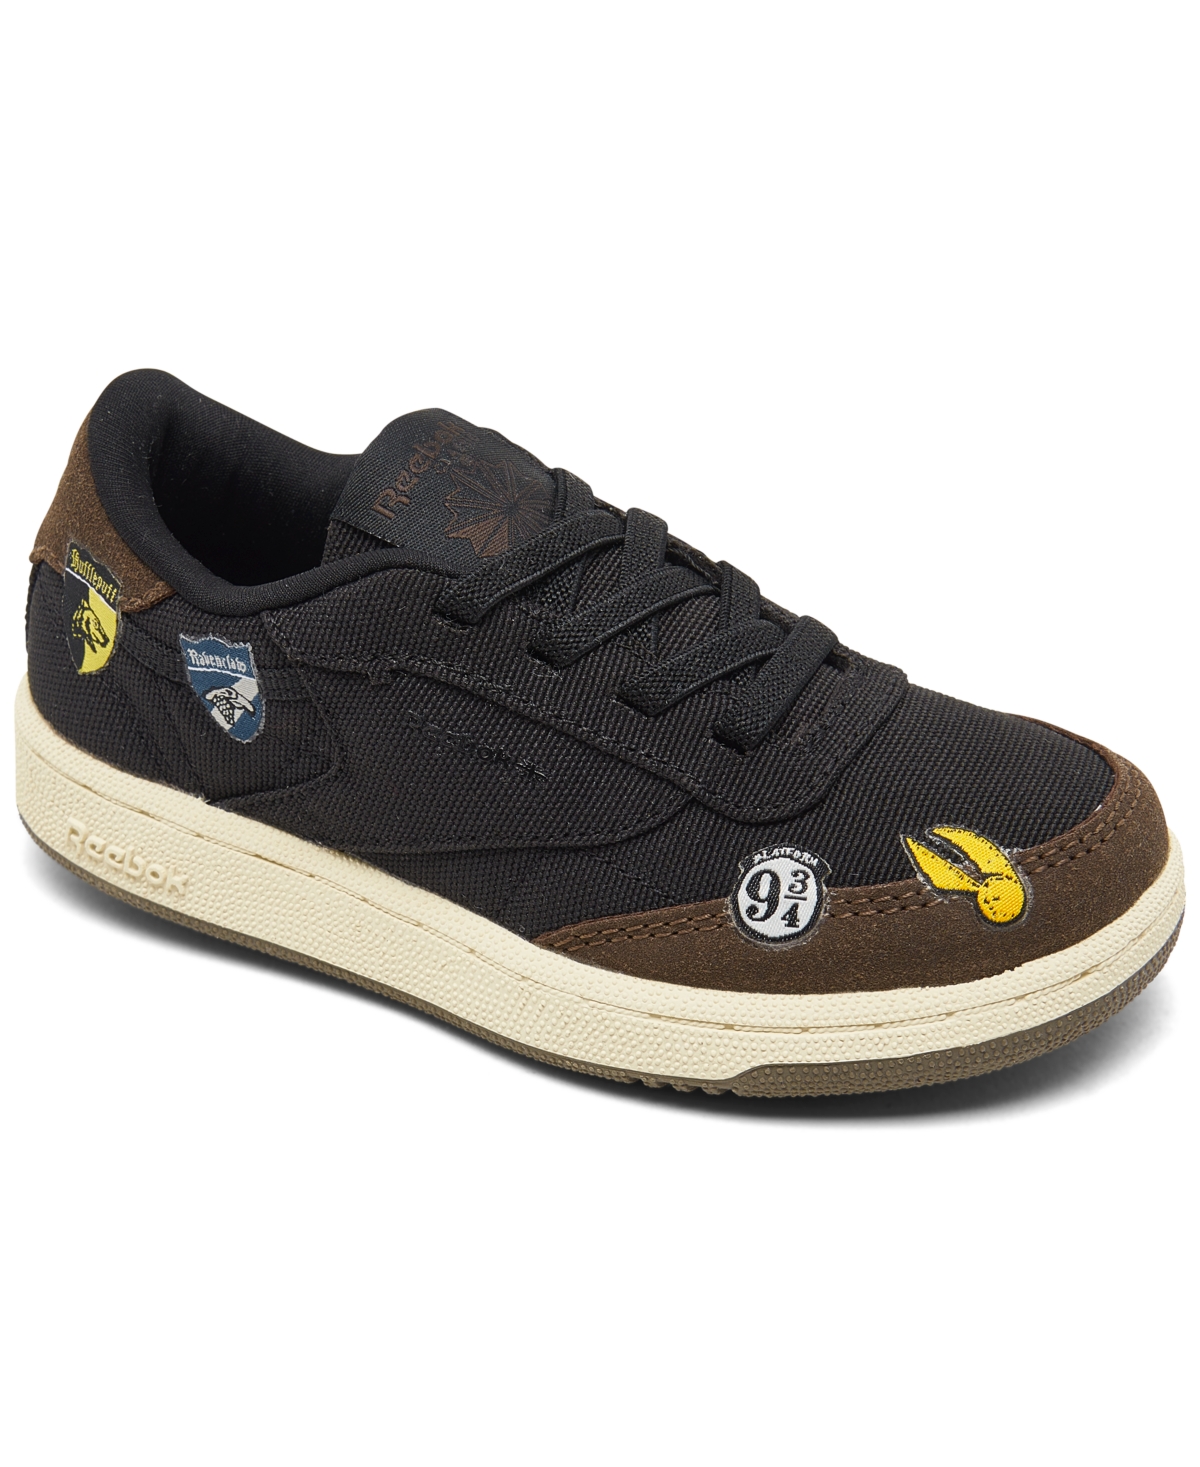 Reebok Babies' Toddler Kids X Harry Potter Club C 85 Casual Sneakers From Finish Line In Night Black/alabaster/brown